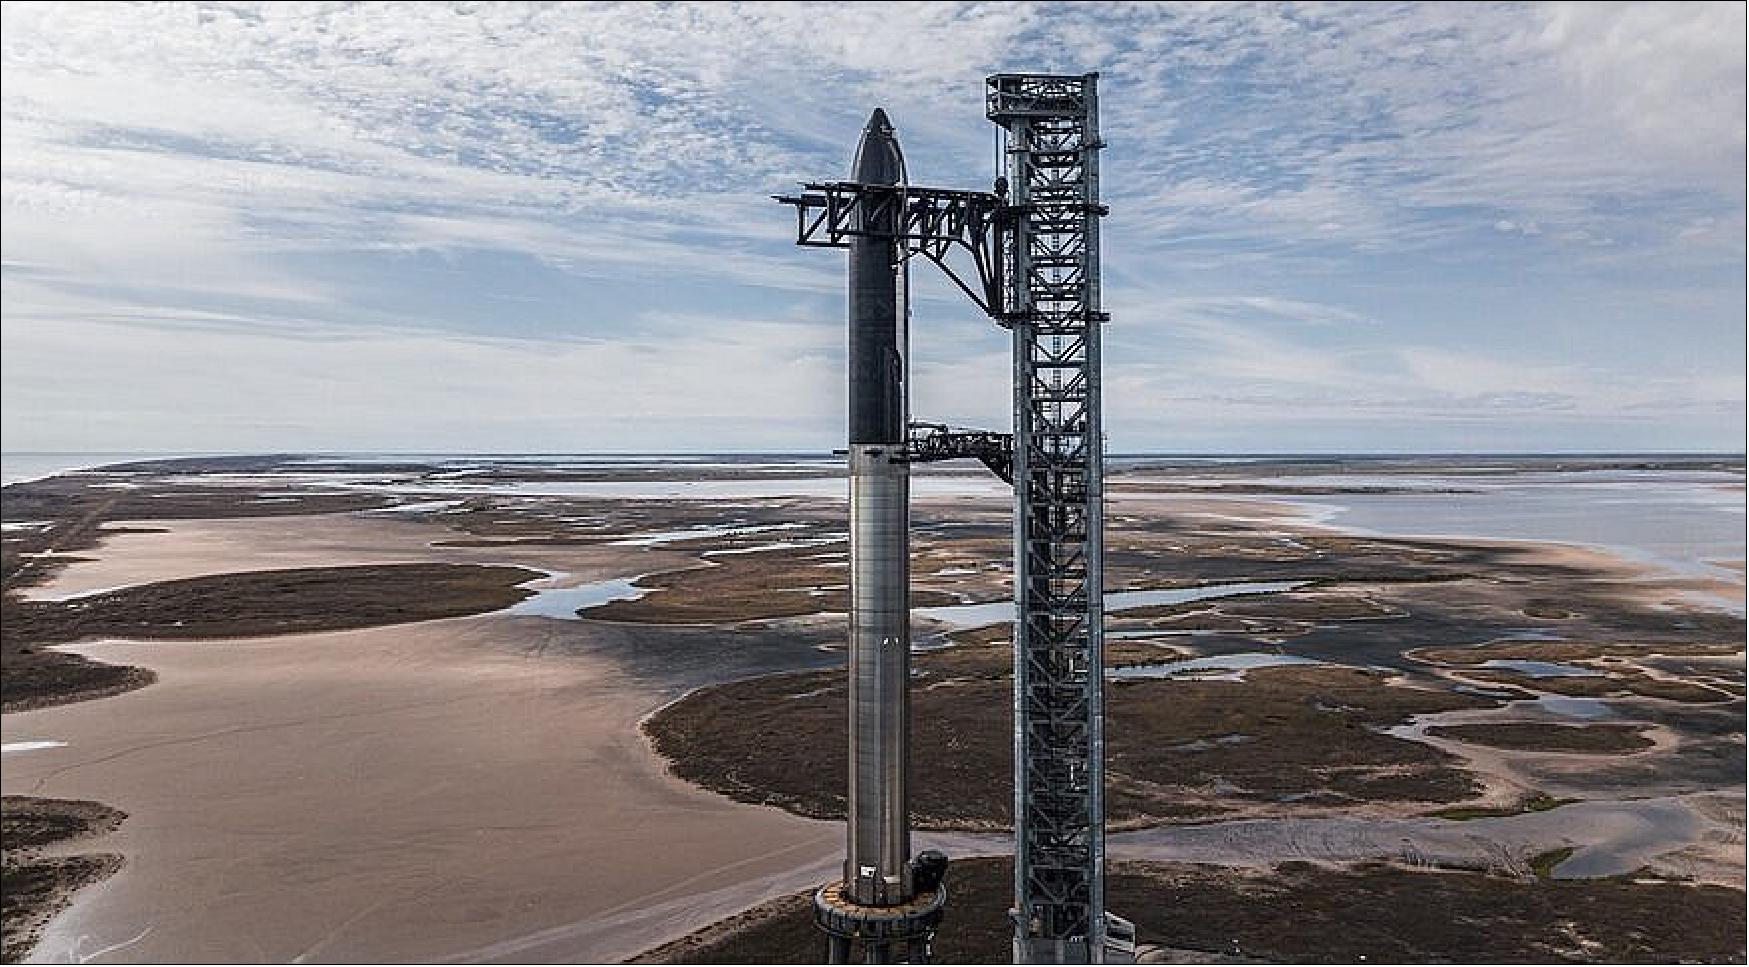 Figure 10: SpaceX showed off a completed Starship/Super Heavy vehicle in February, but that vehicle now appears unlikely to perform the first orbital launch attempt once the FAA awards a license to the company (image credit: SpaceX)